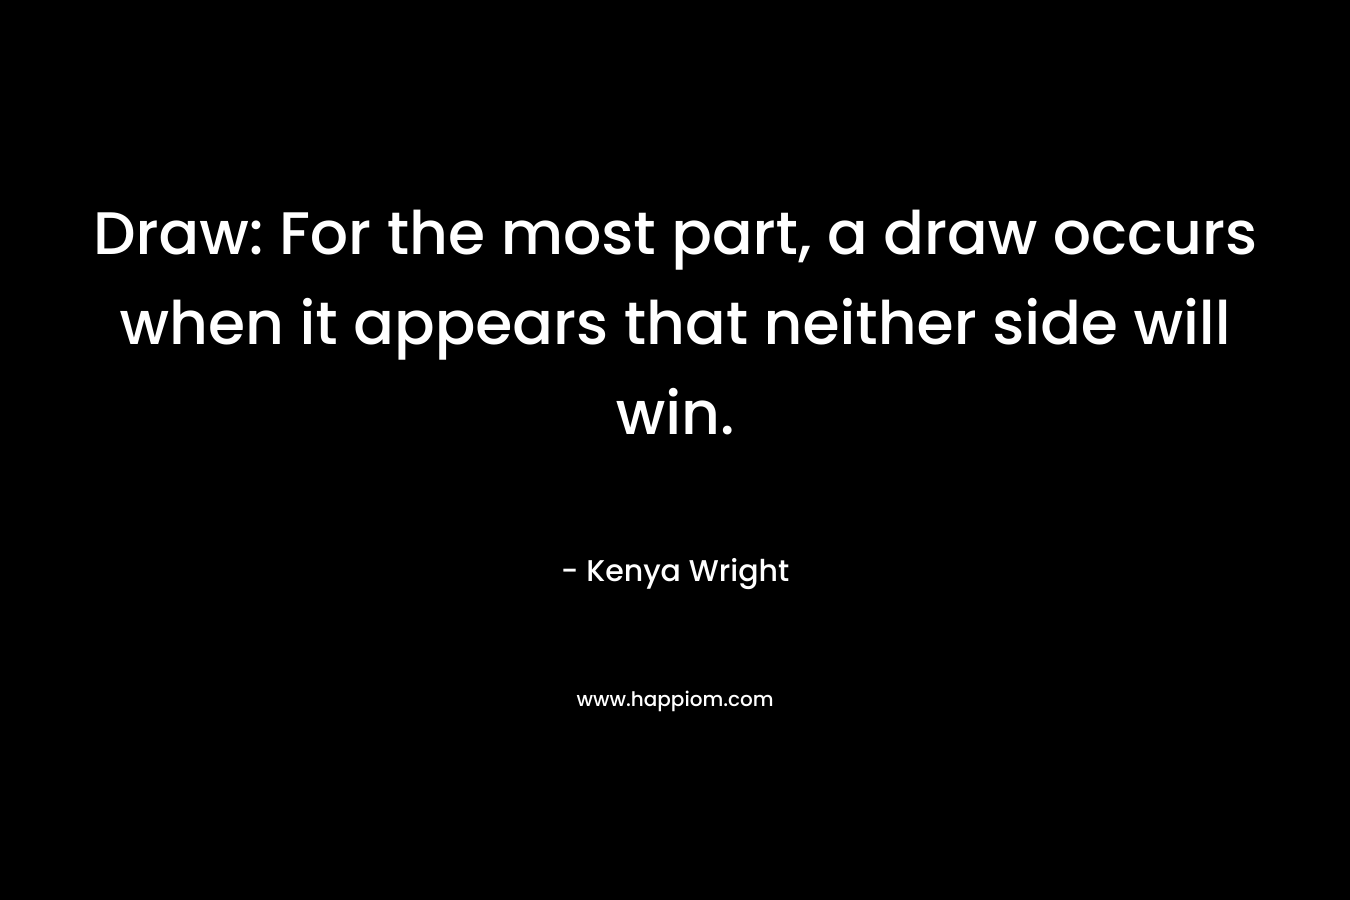 Draw: For the most part, a draw occurs when it appears that neither side will win. – Kenya Wright